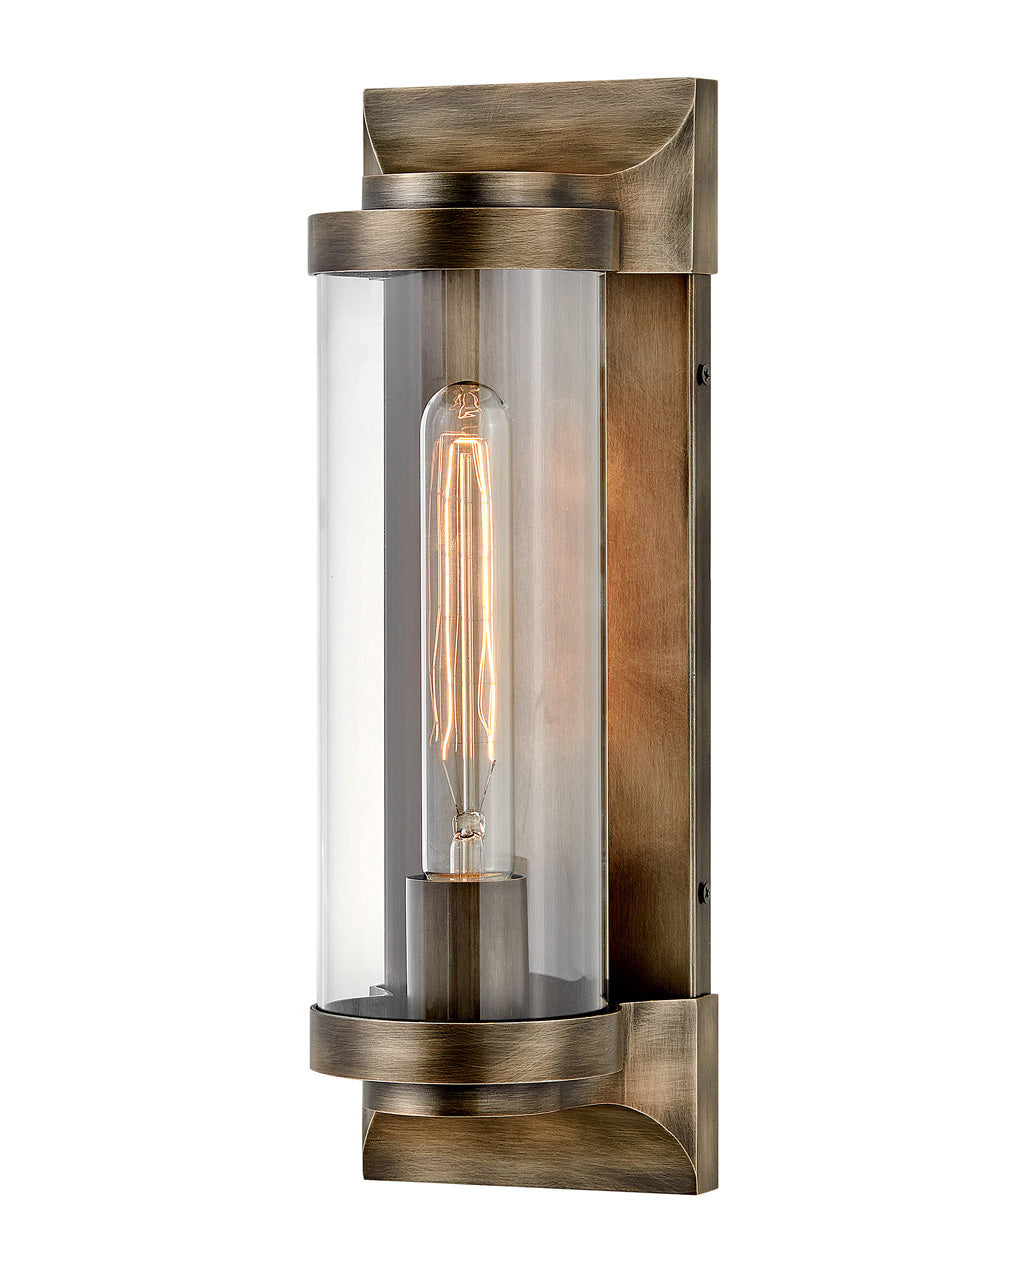 OUTDOOR PEARSON Wall Mount Lantern Outdoor l Wall Hinkley Burnished Bronze 4.75x4.5x14.0 